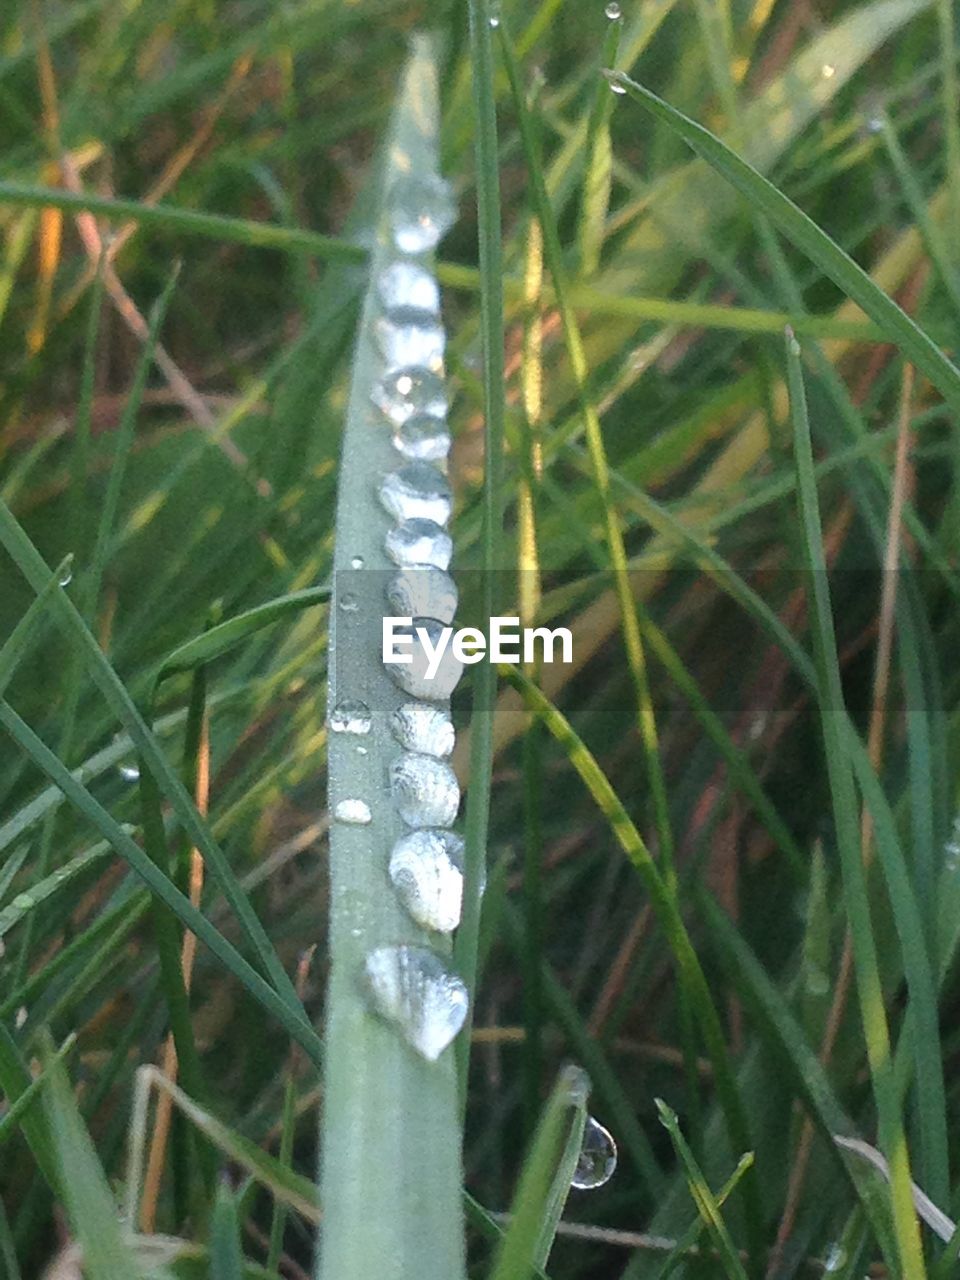 CLOSE-UP OF WET LEAF ON GRASS